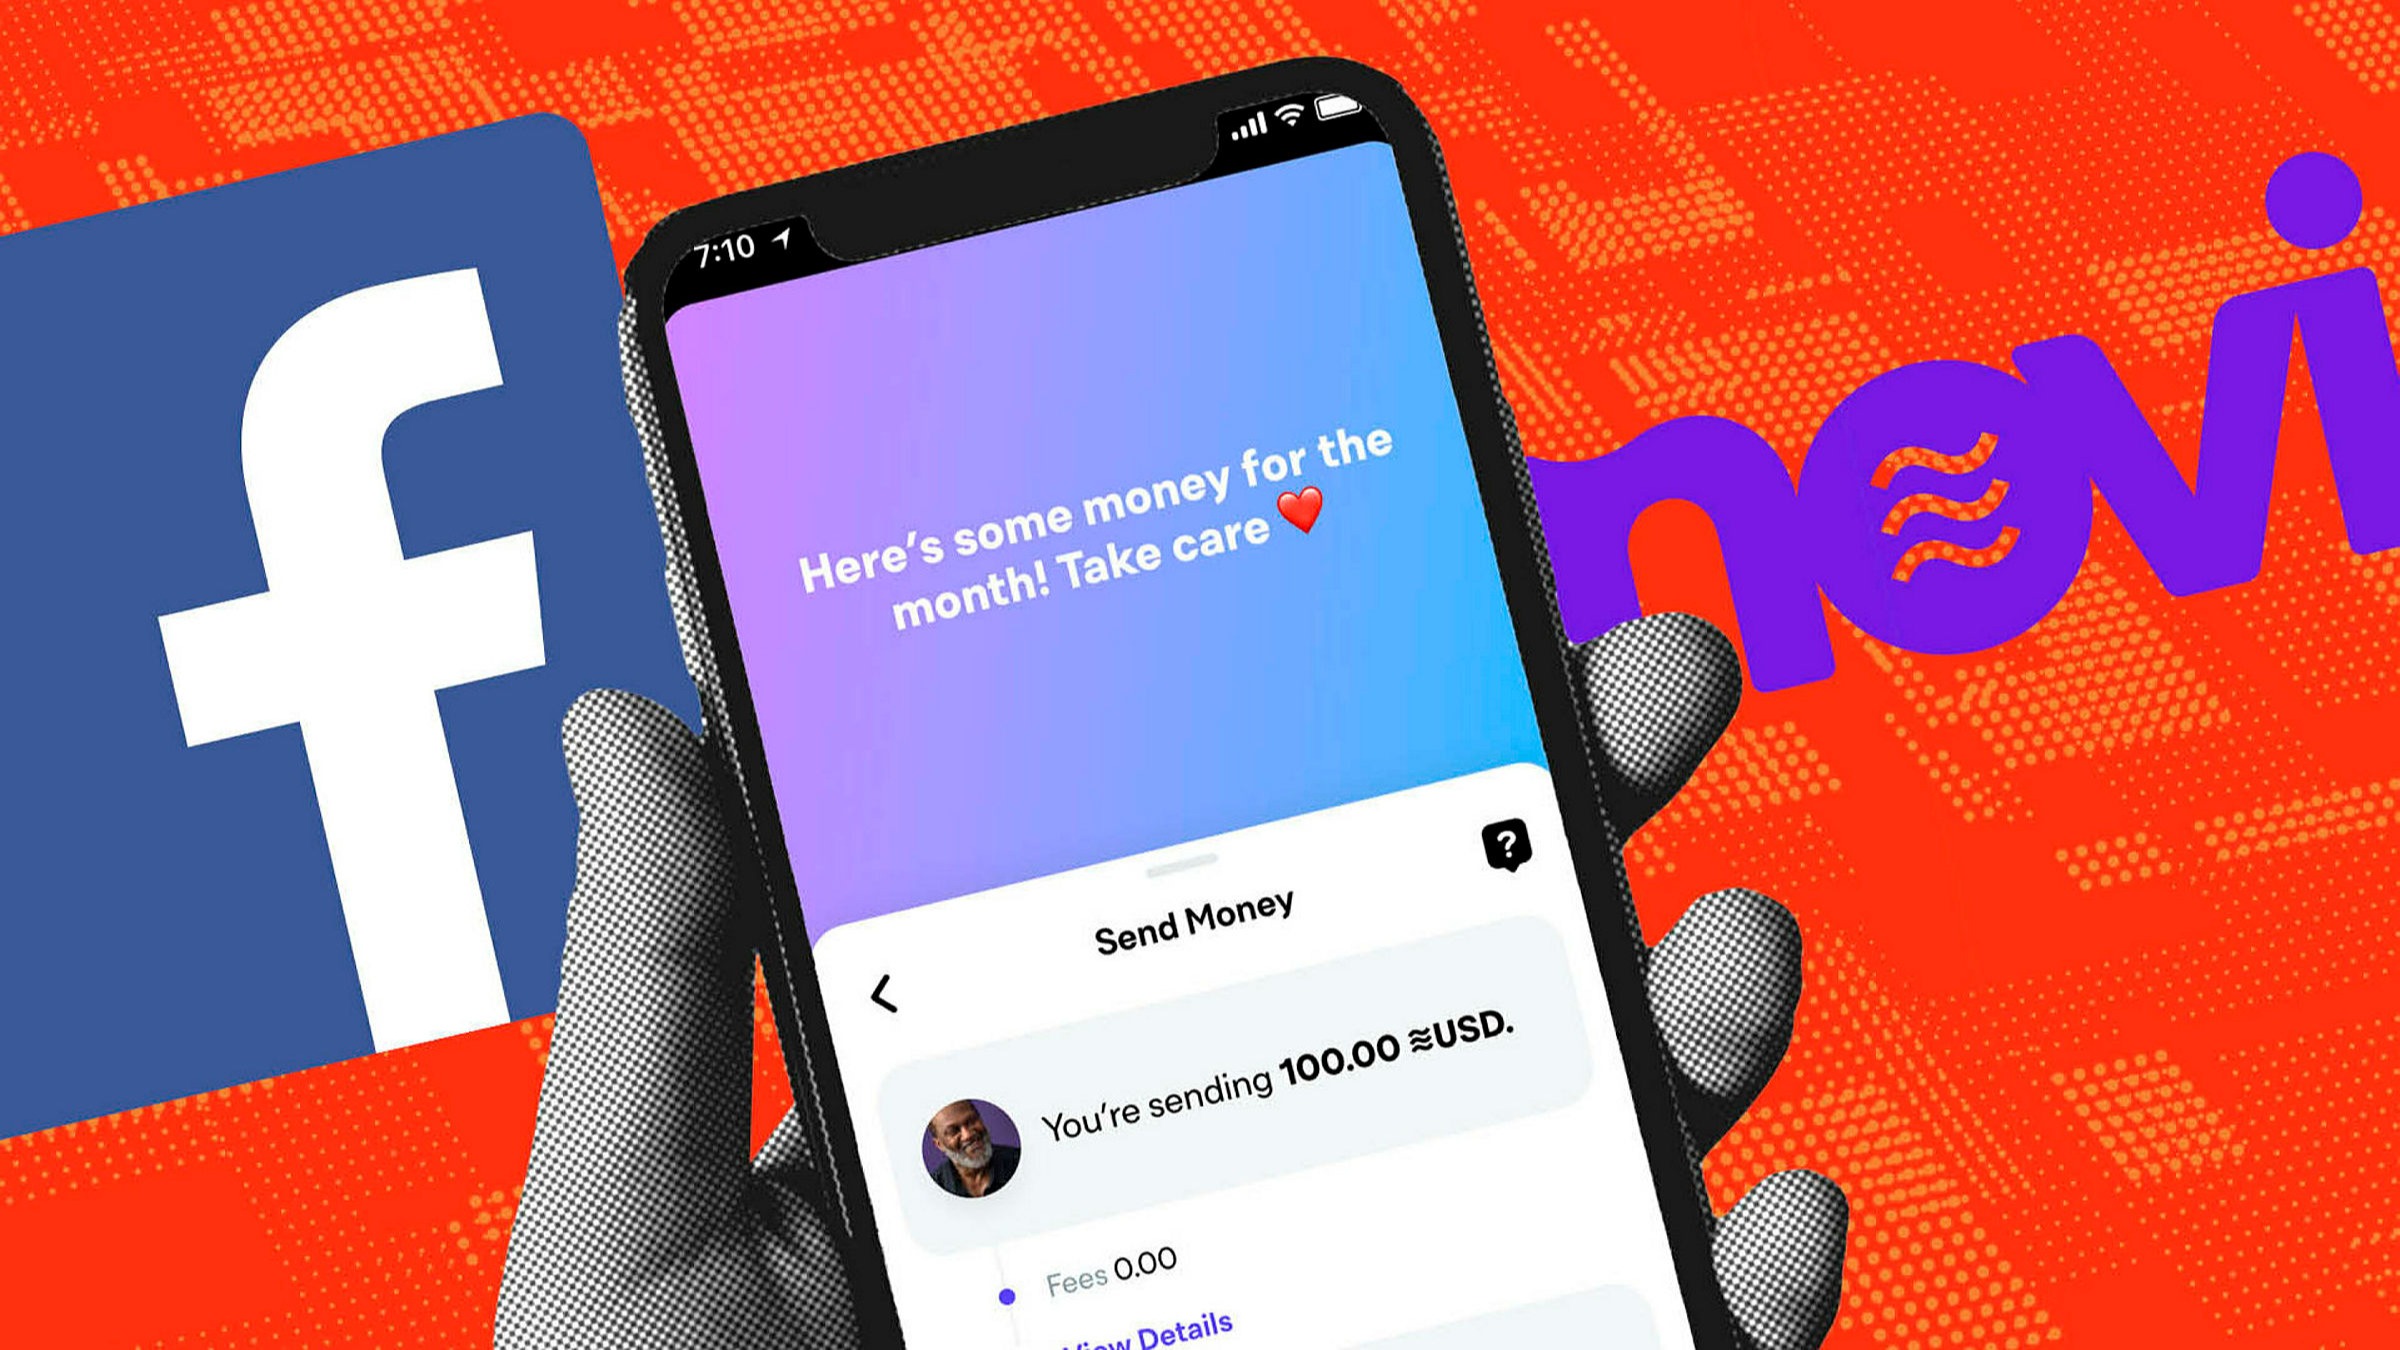 Facebook launches digital currency wallet Novi | Financial Times